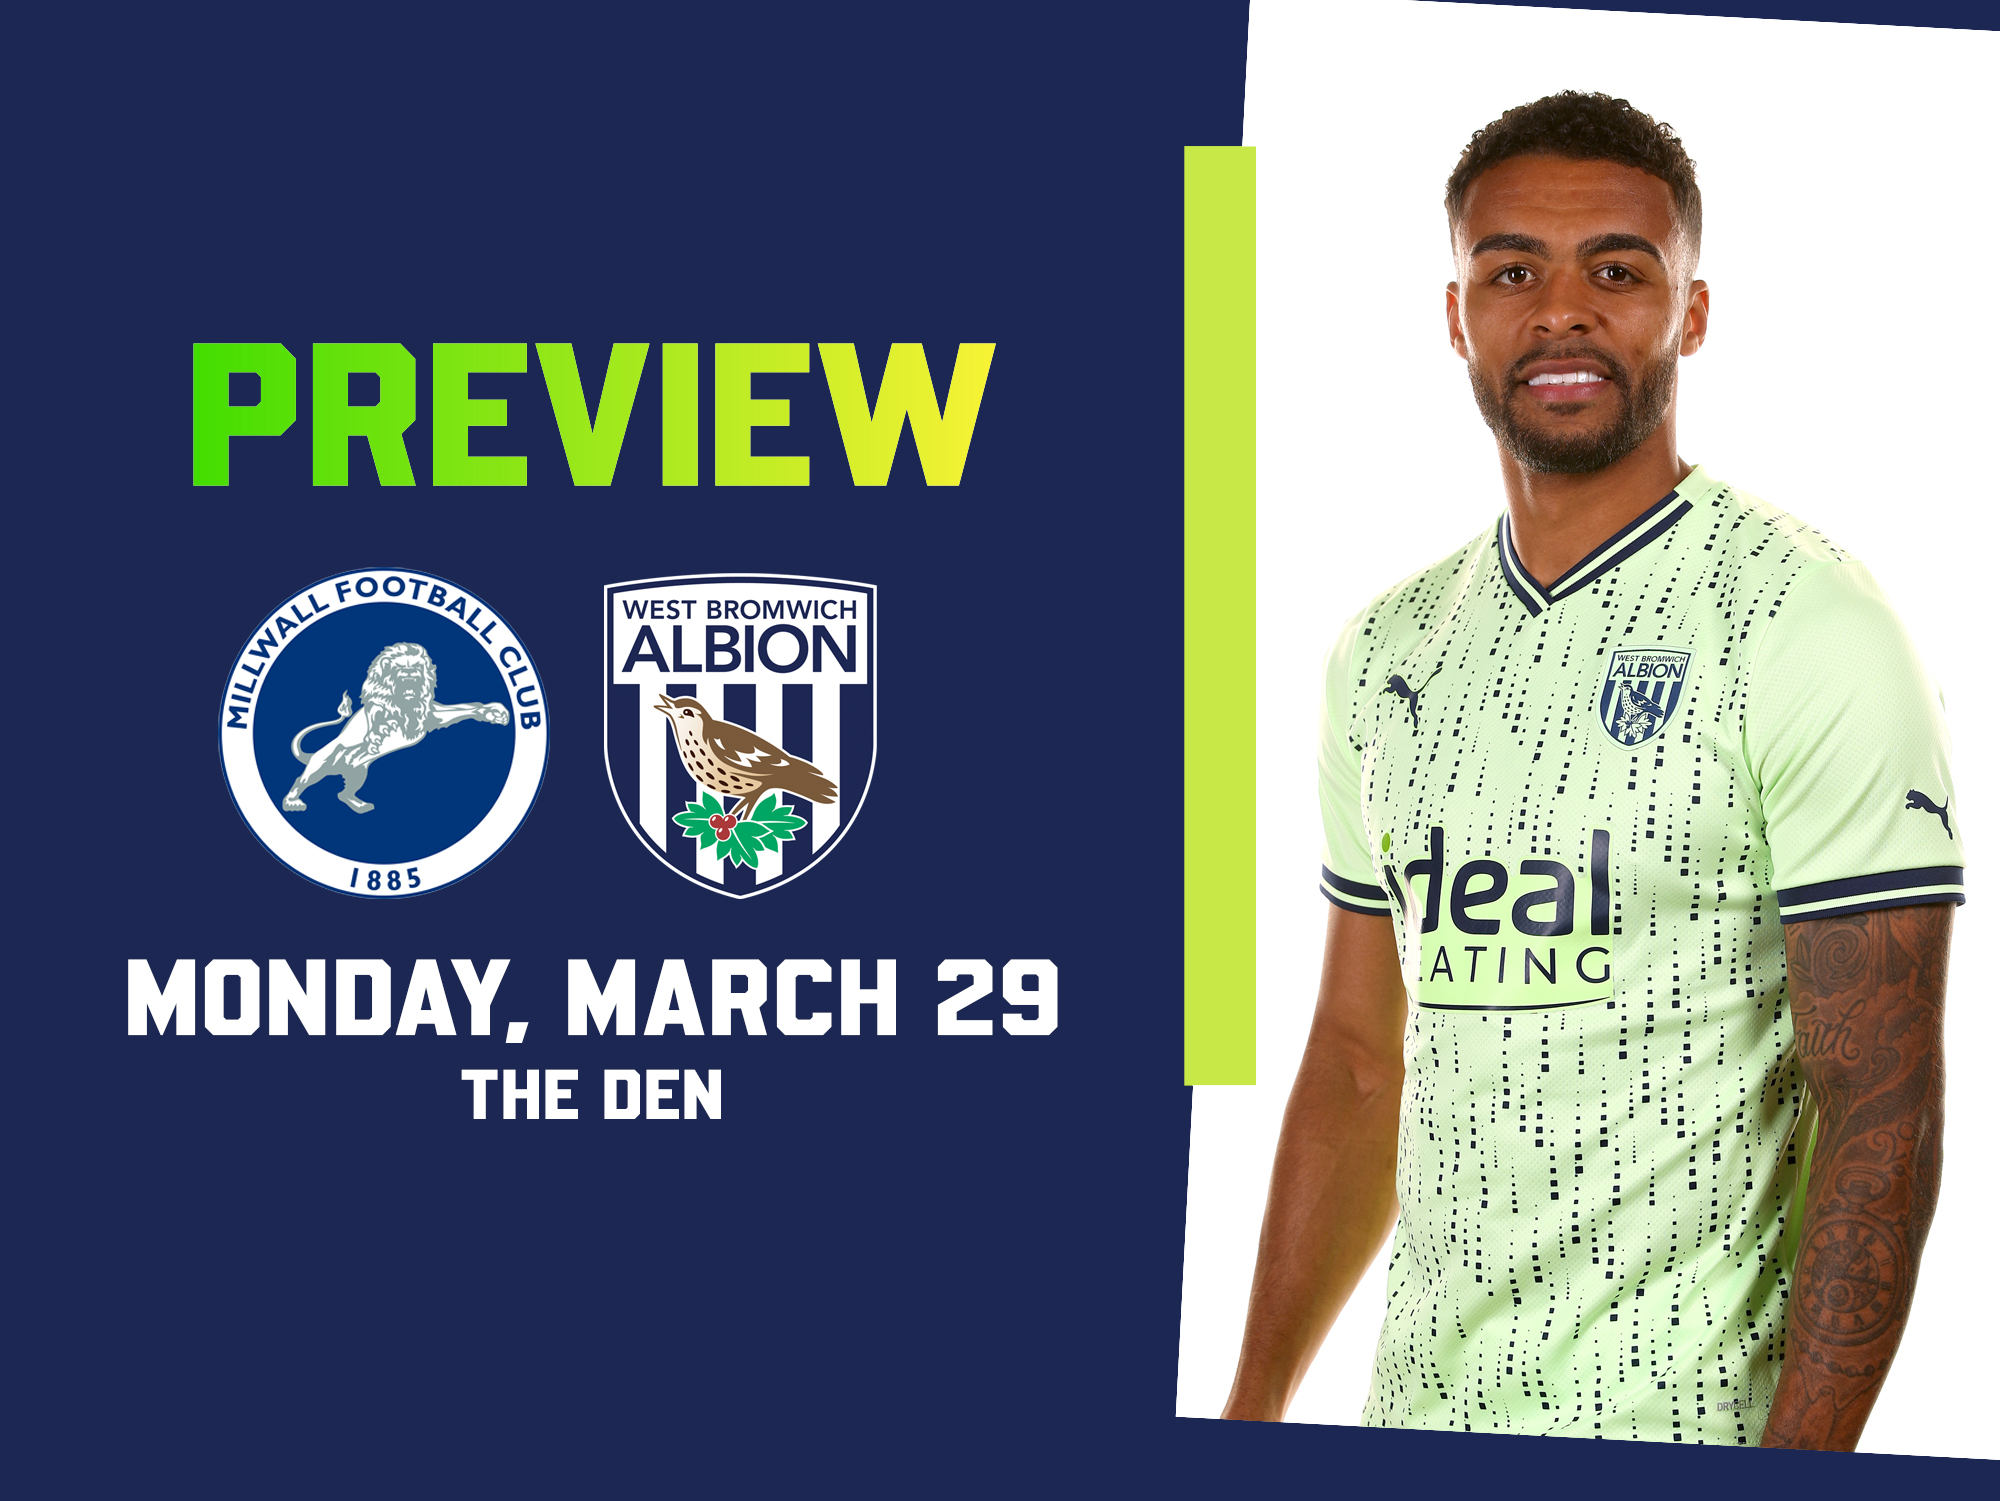 Millwall and WBA badges on the lime green match preview away graphic with an image of Darnell Furlong smiling at the camera while wearing the lime green away shirt